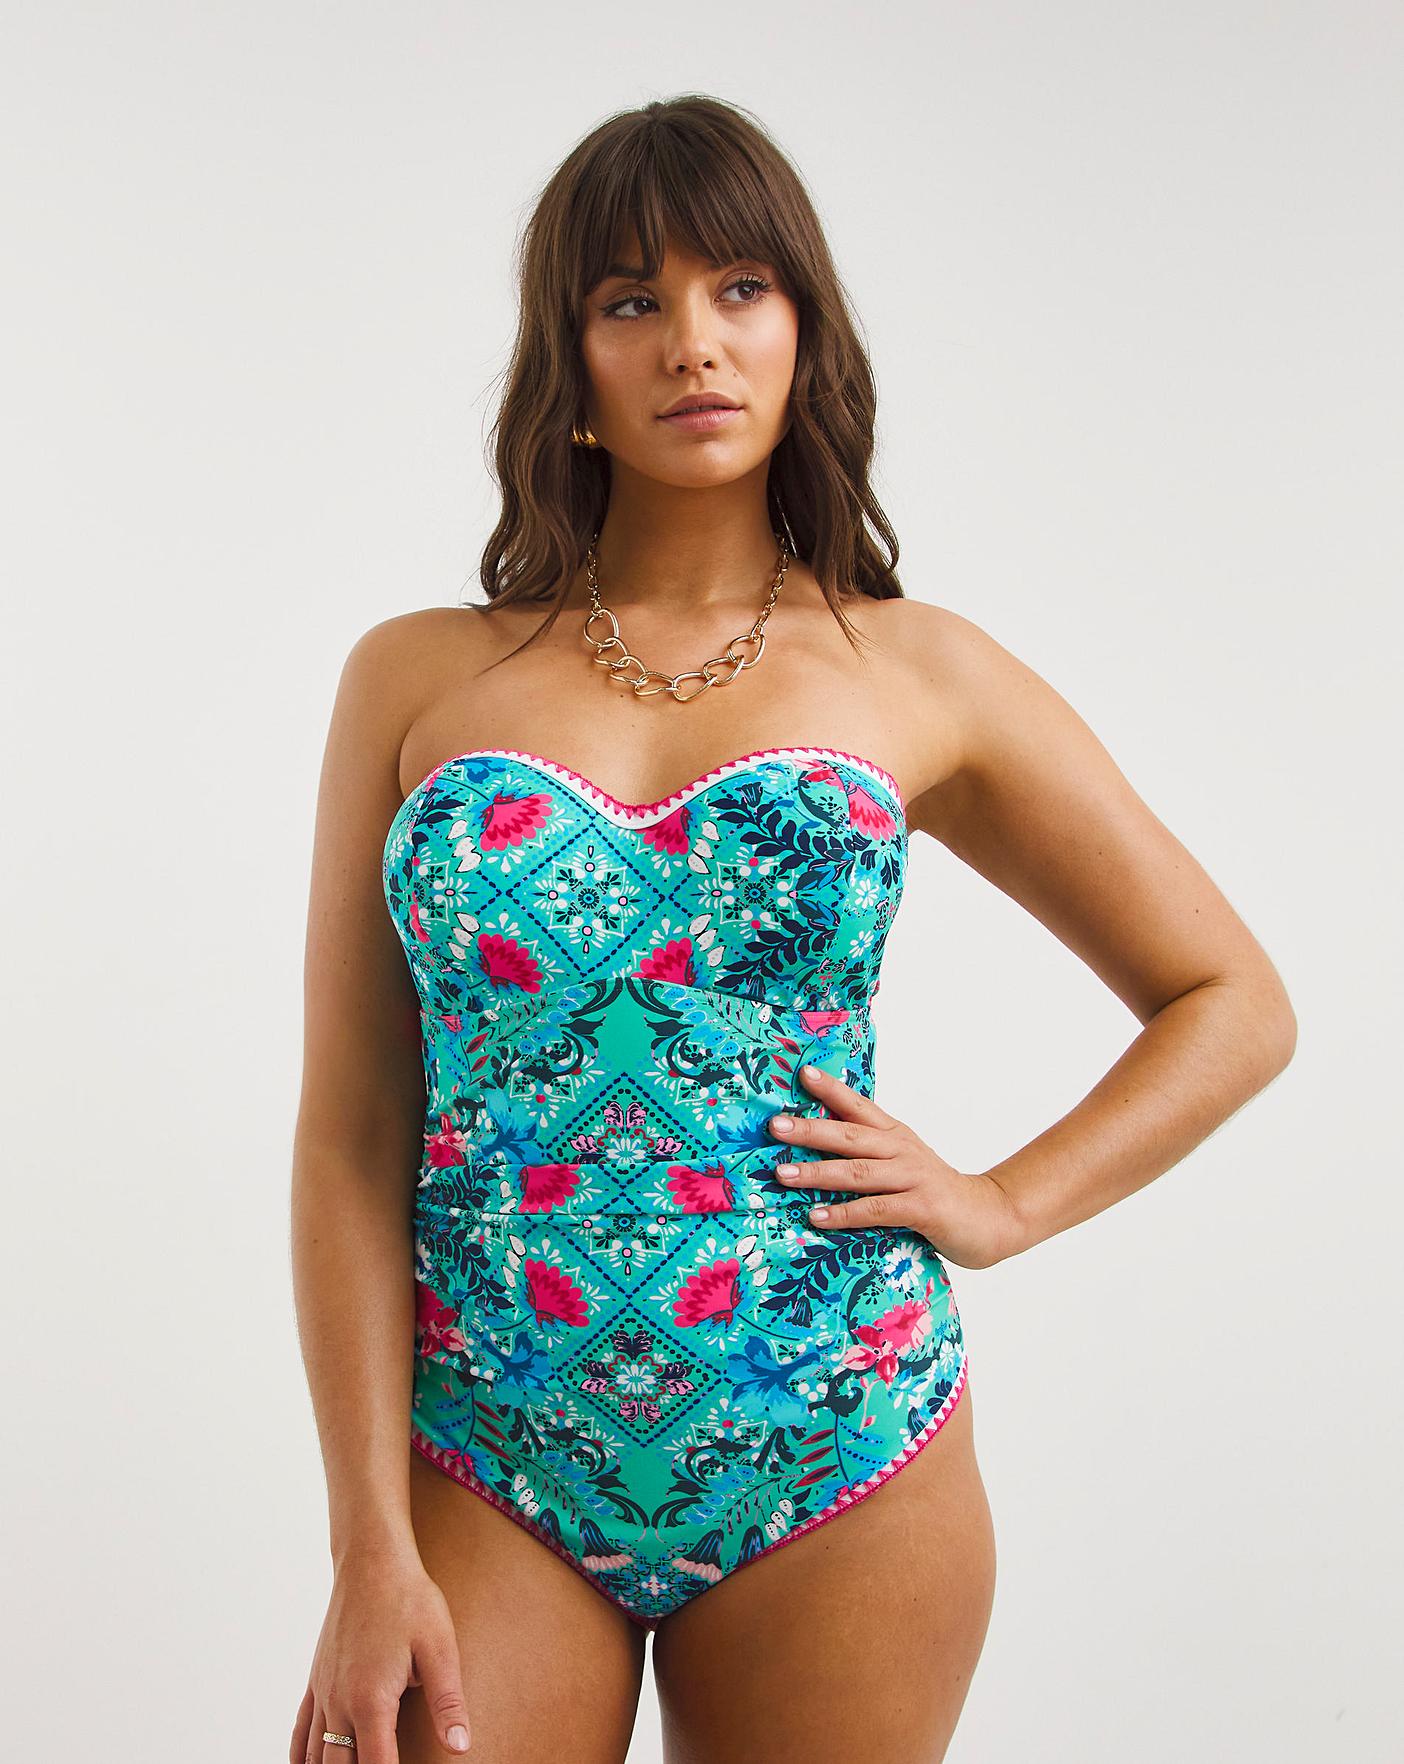 F&F Clothing, Women's Dresses, Jumpers & Swimsuits